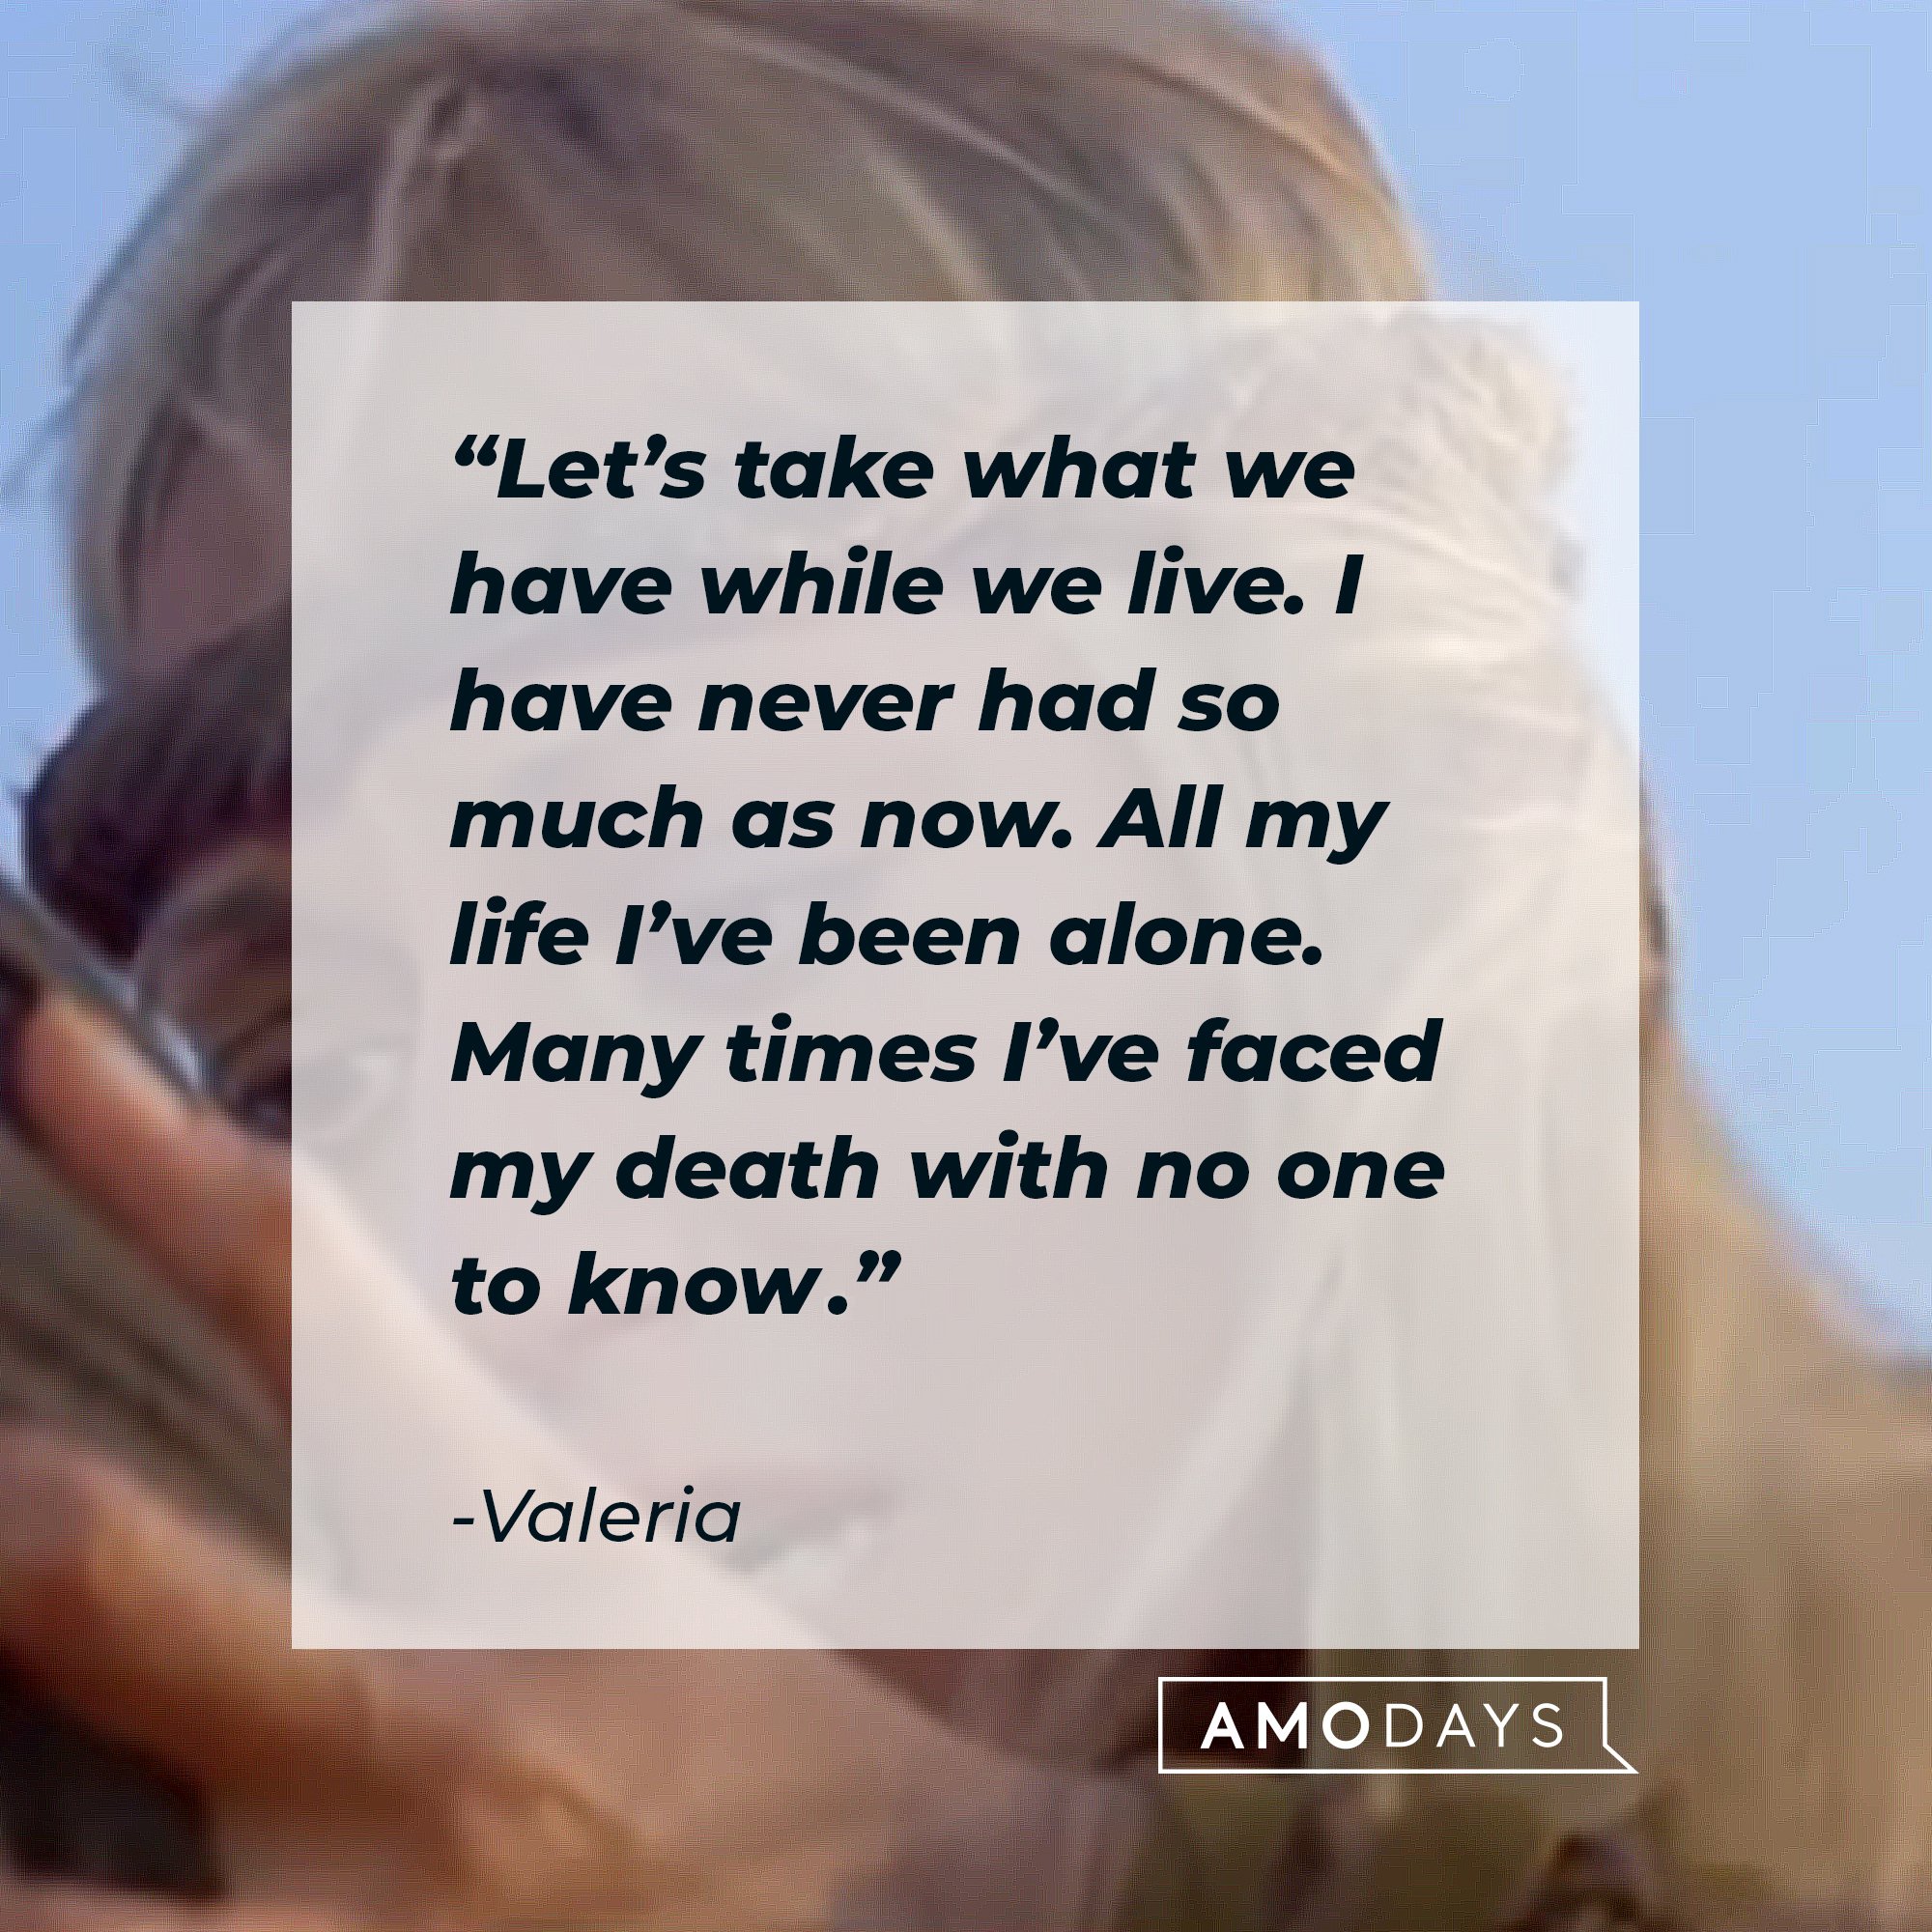 Valeria's quote: “Let’s take what we have while we live. I have never had so much as now. All my life I’ve been alone. Many times I’ve faced my death with no one to know.” | Image: AmoDays